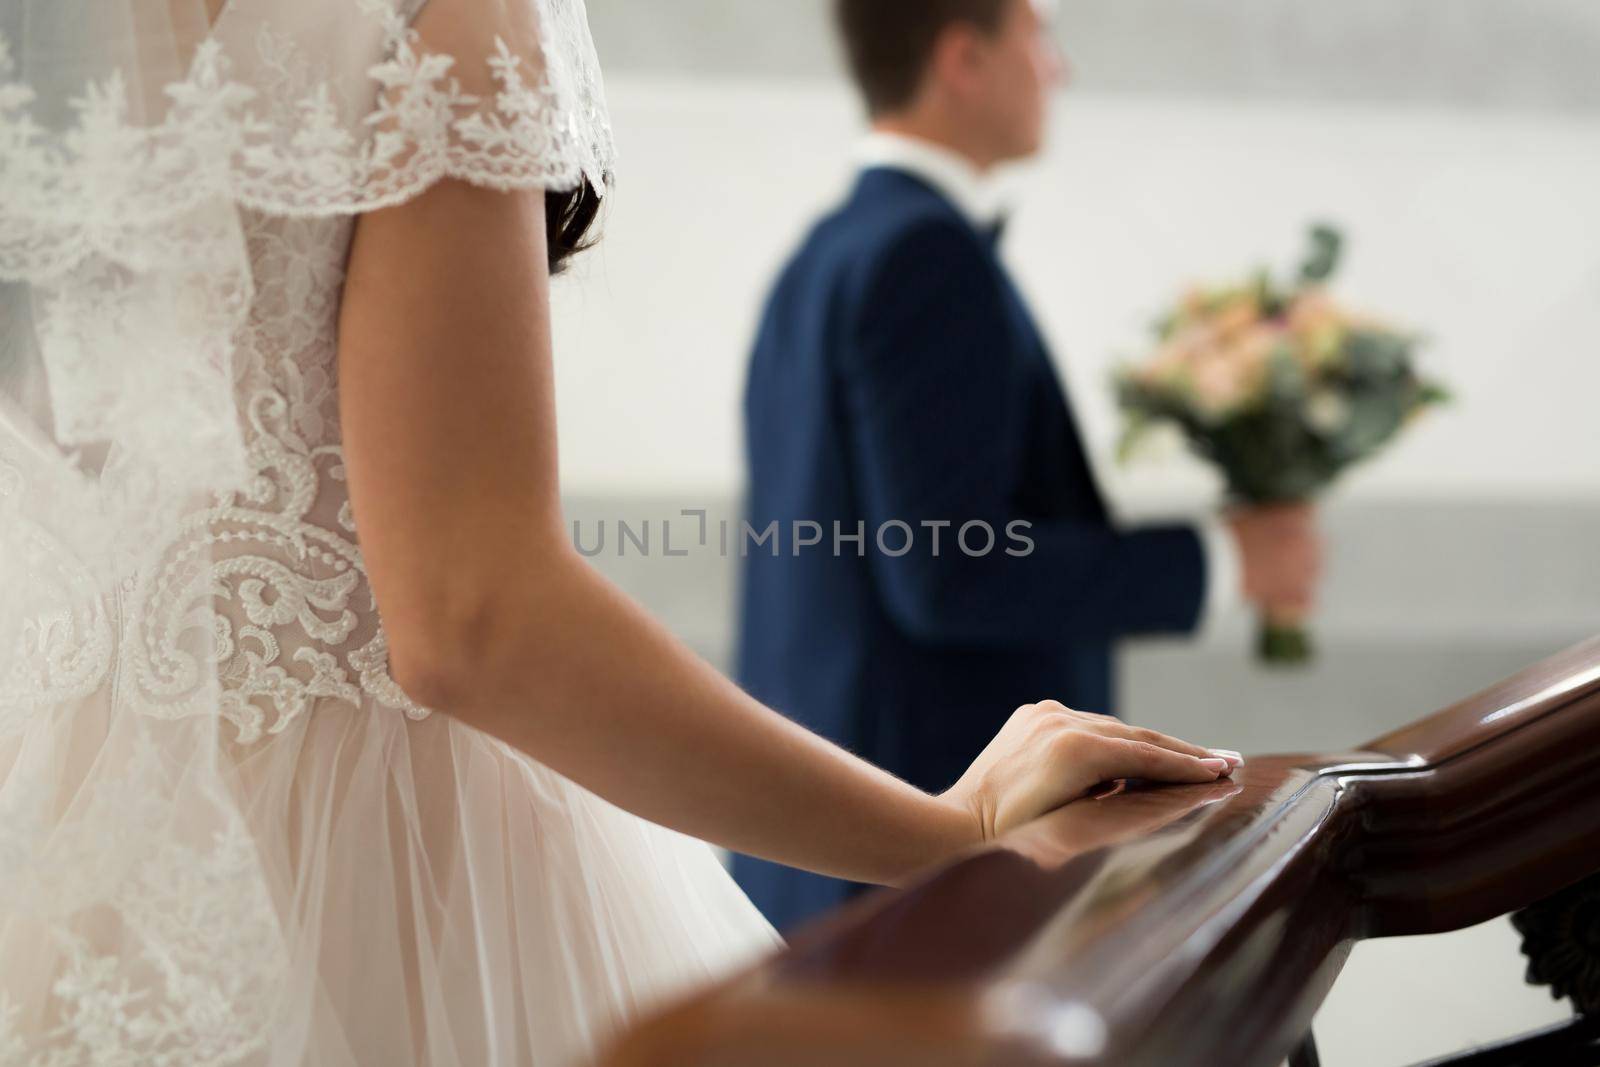 The bride goes to meet the groom. hand on a wooden railing close up